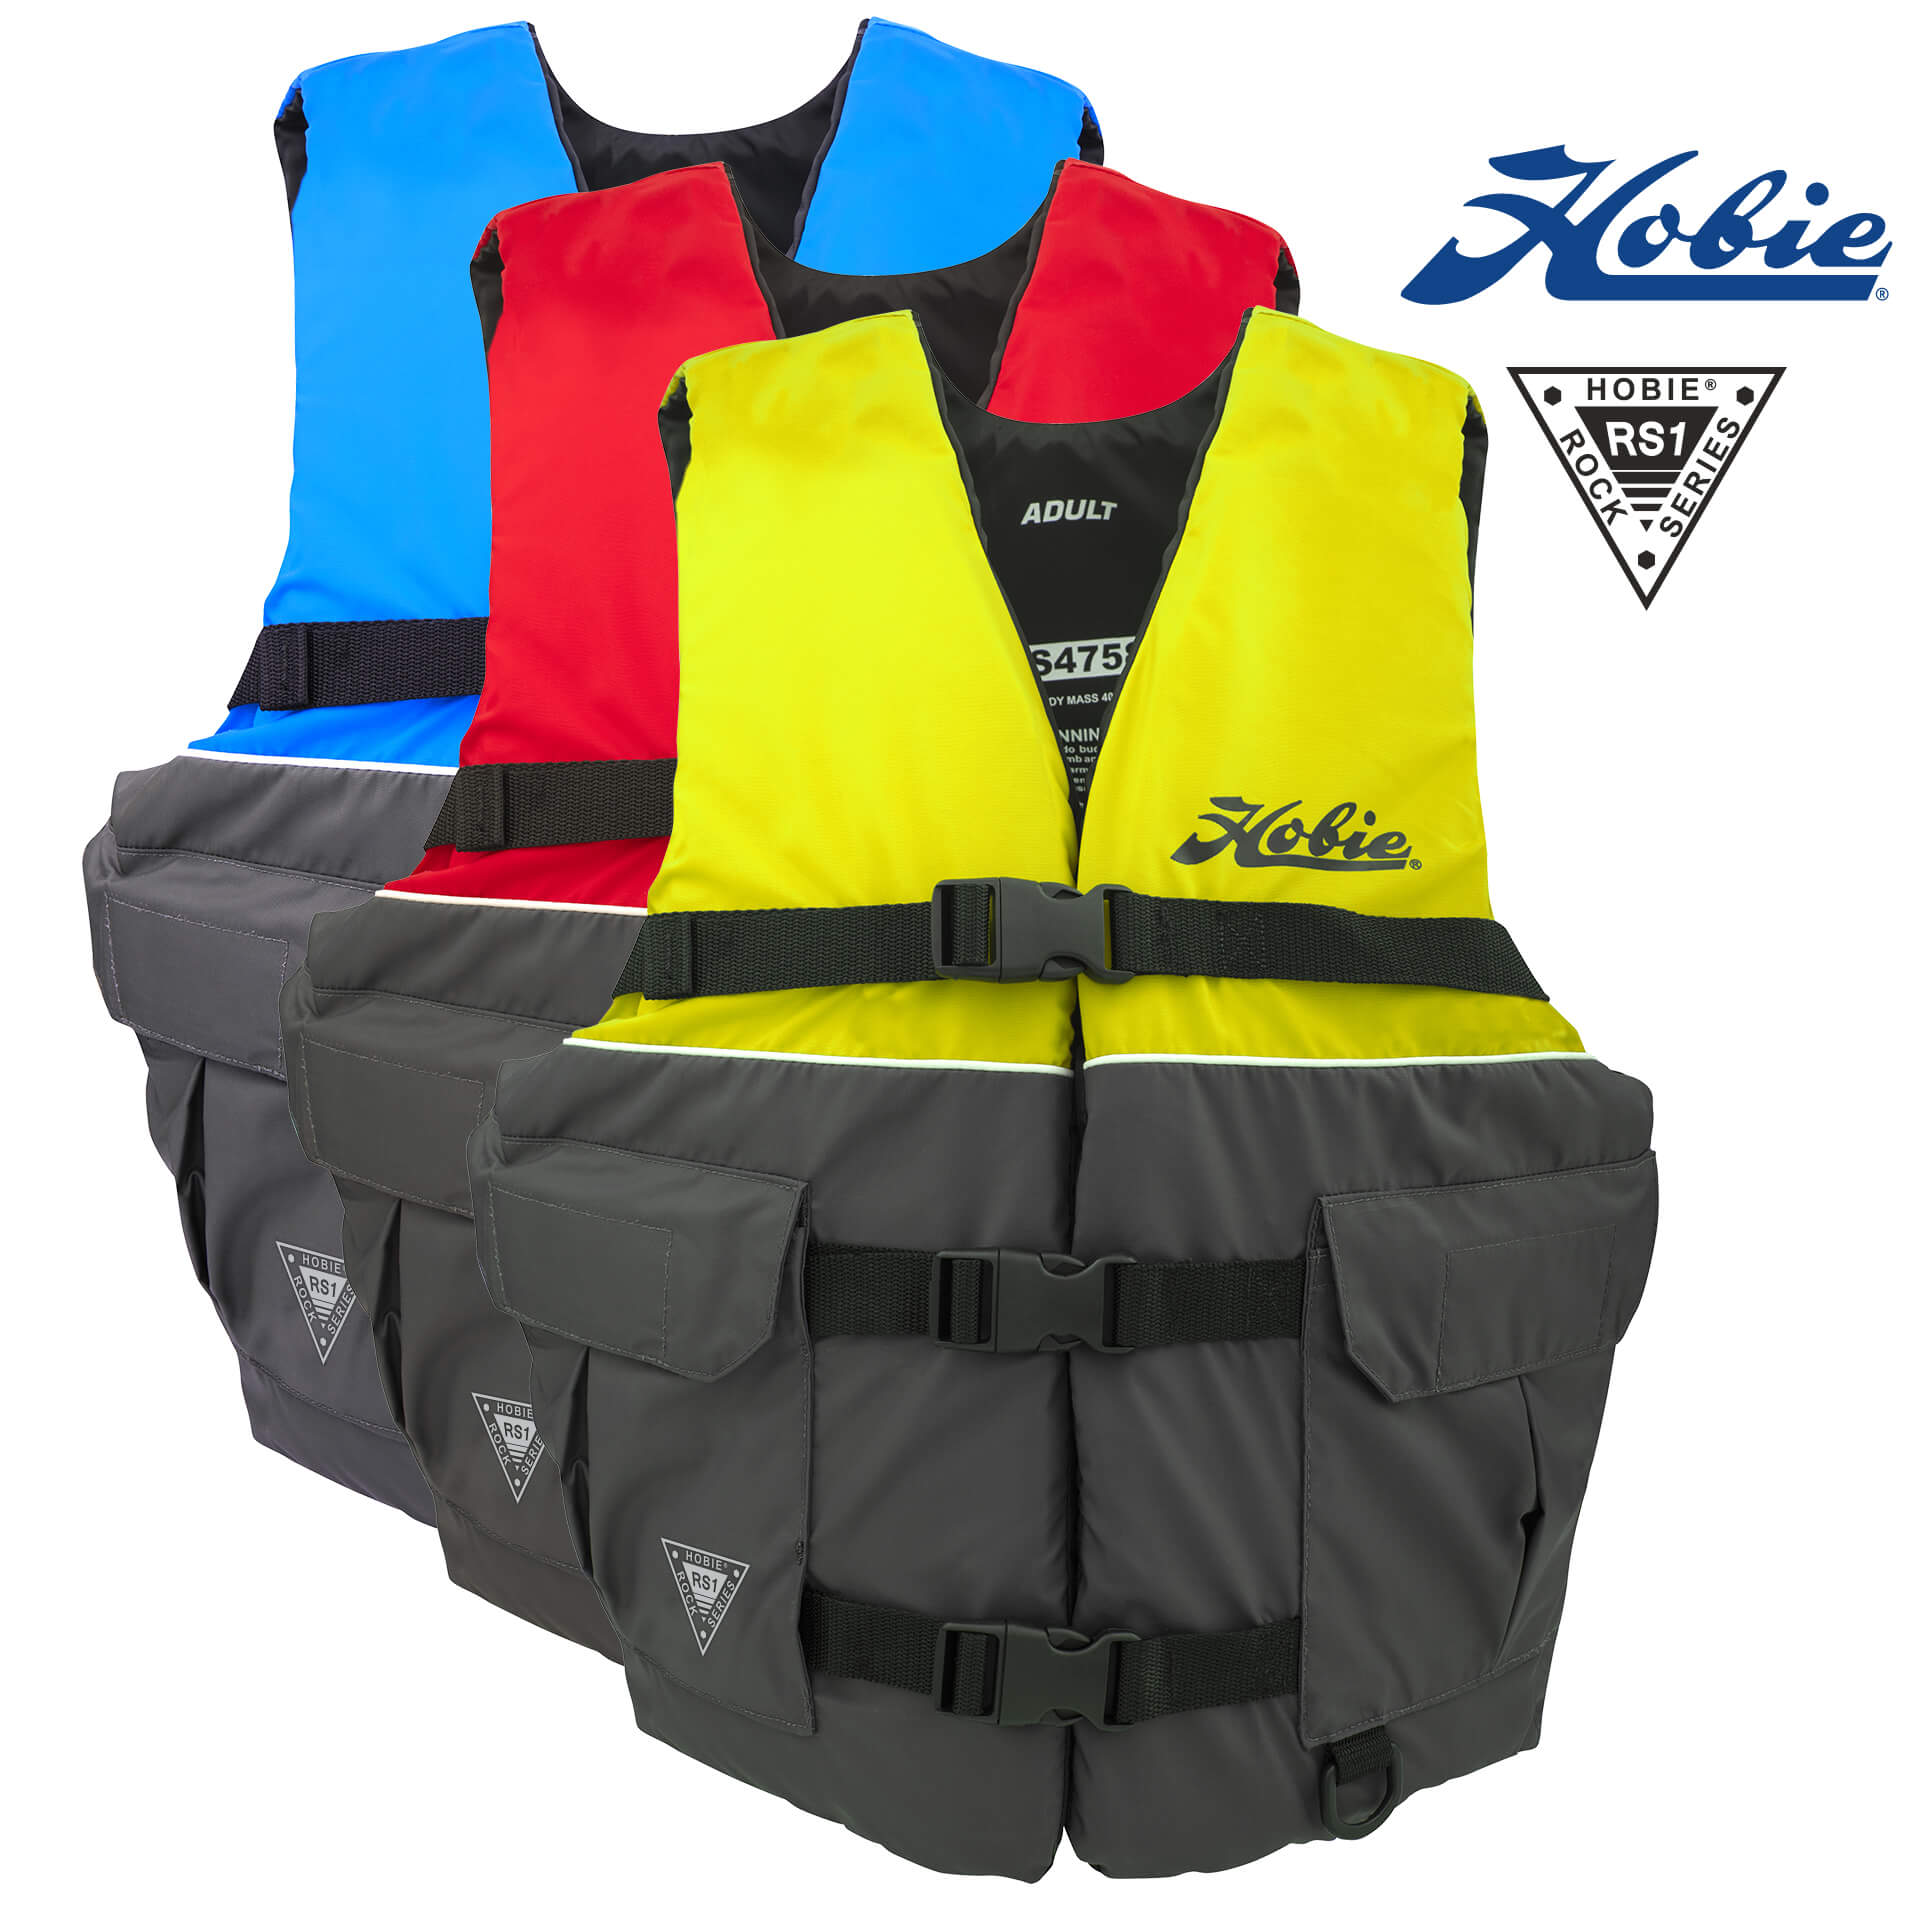 Hobie Series 1 PFDs come in blue and yellow sku: